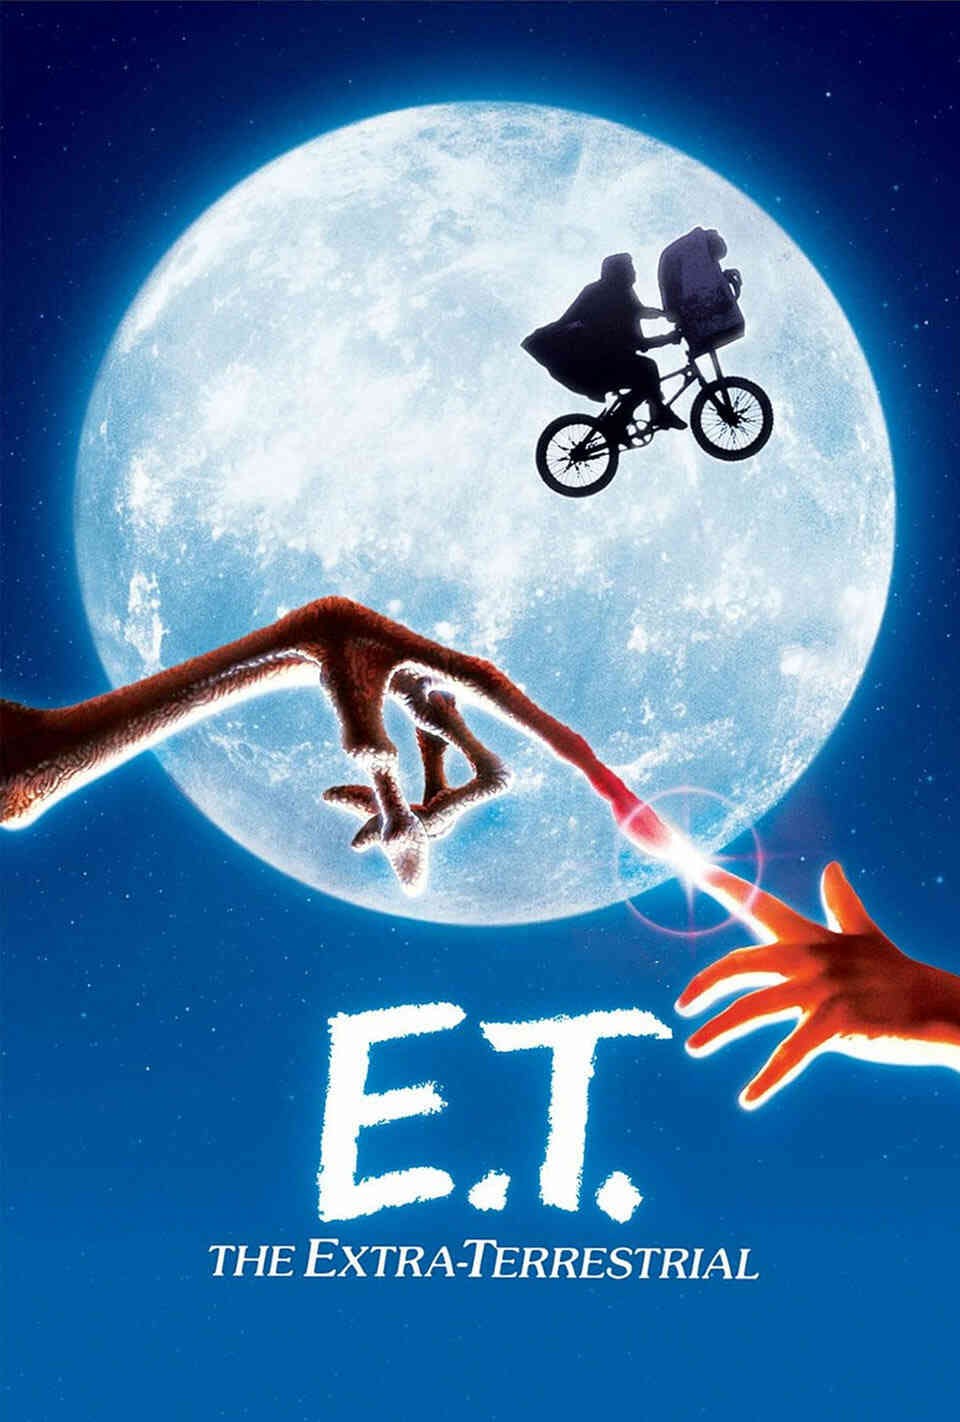 Read E.T. the Extra Terrestrial screenplay.